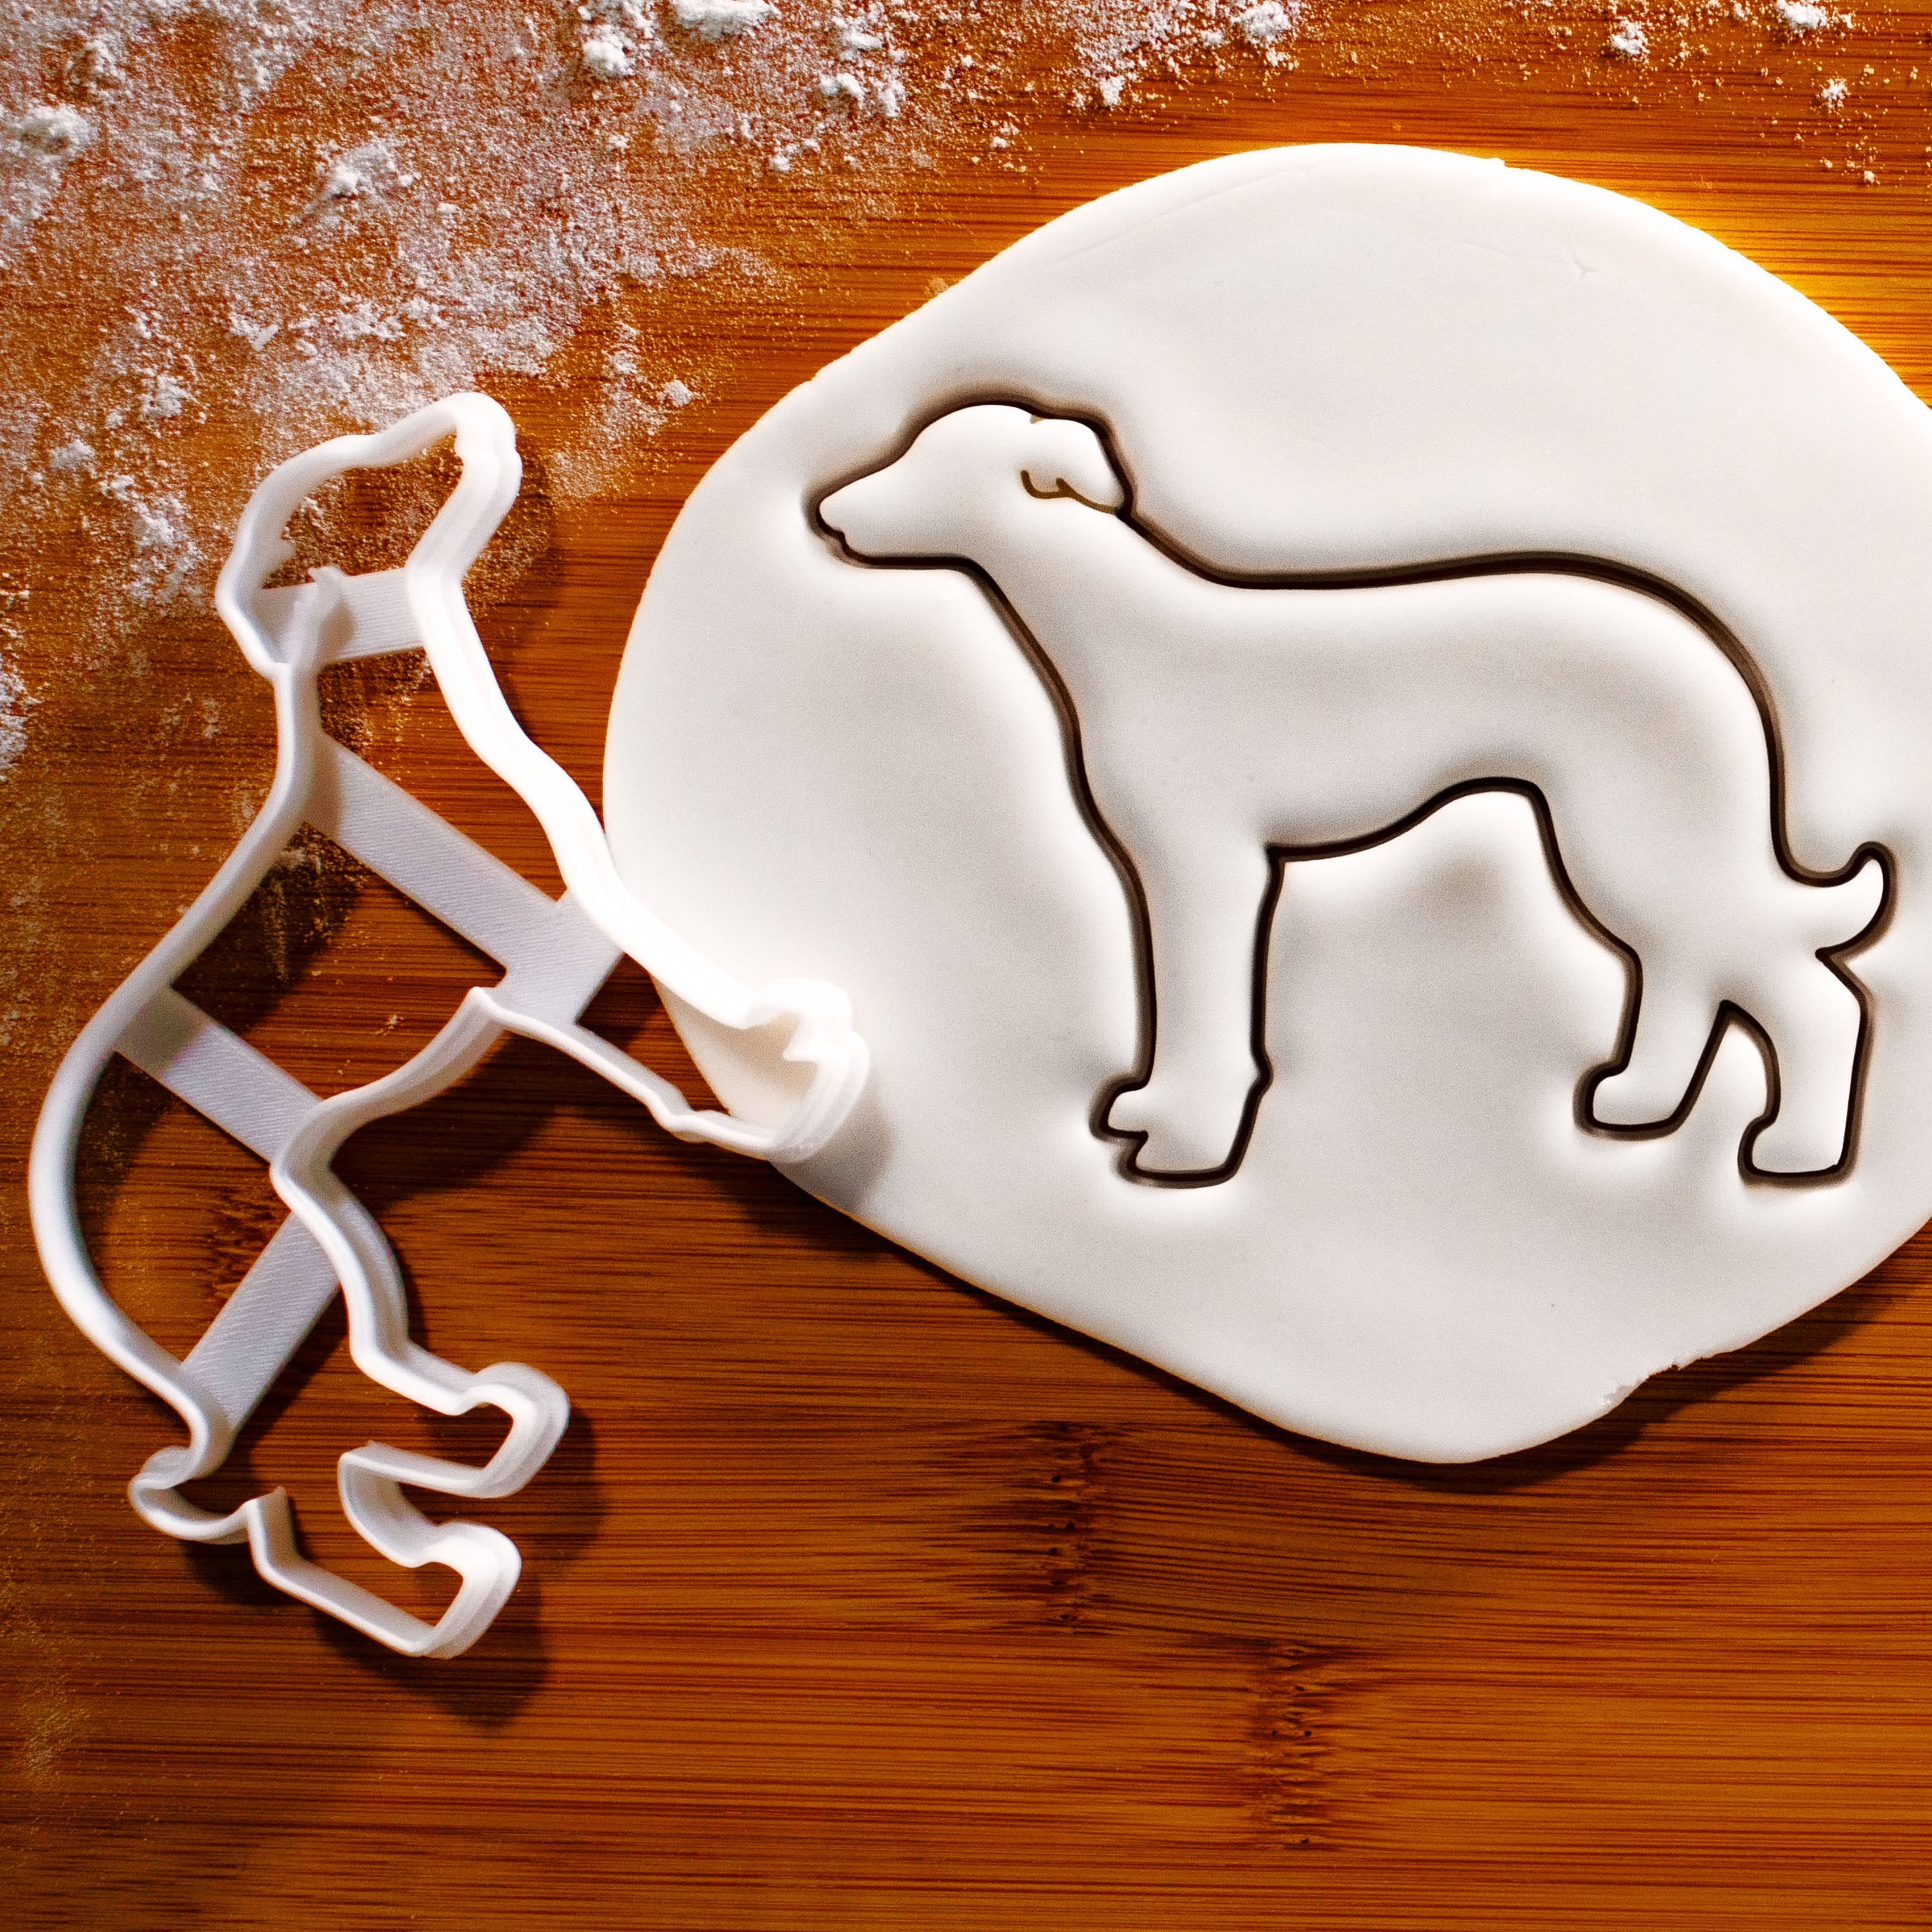 Whippet dog silhouette cookie cutter pressed onto white fondant icing to show imprints - Bakerlogy